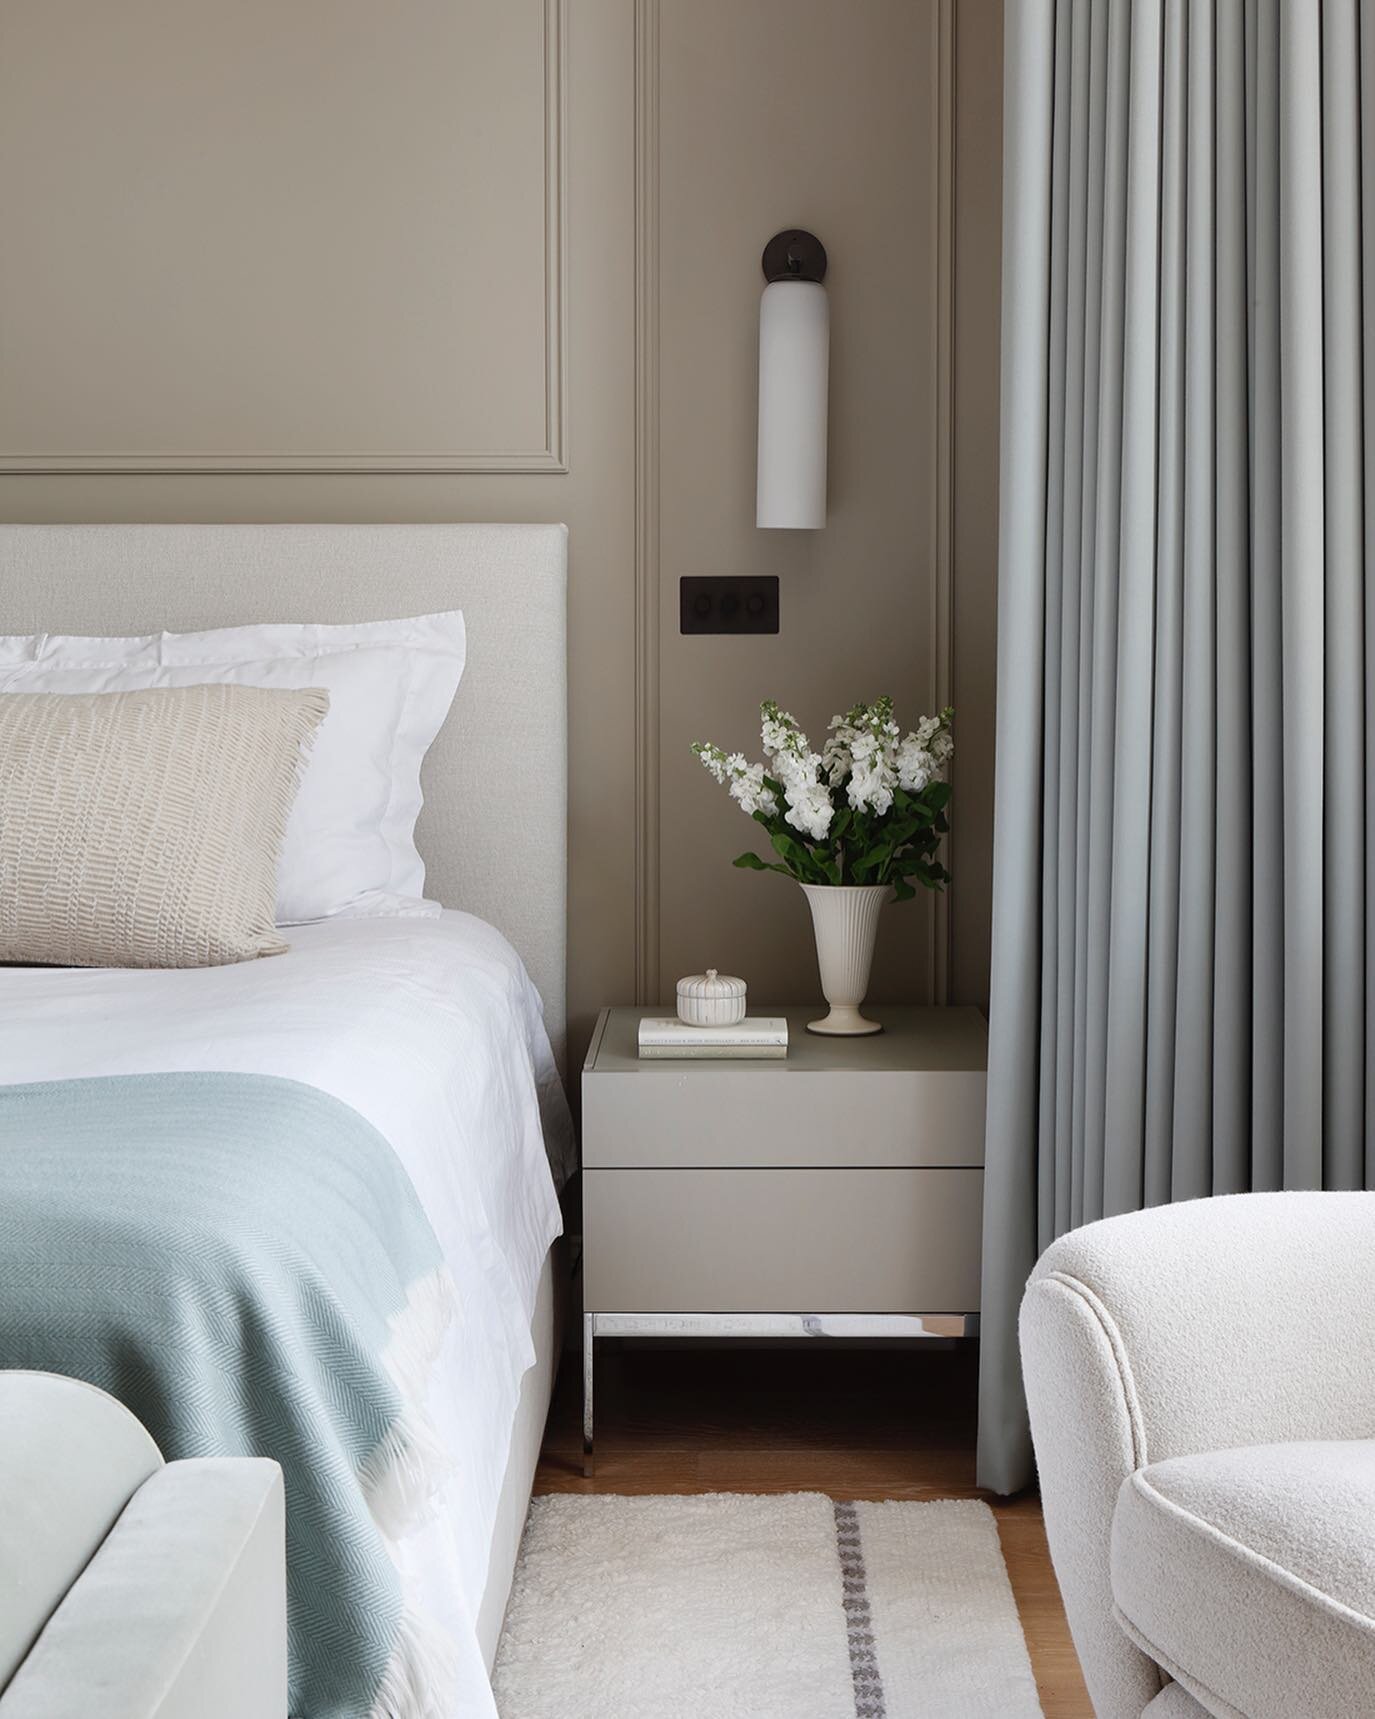 We prefer to use plain fabrics over patterned in bedrooms to create peaceful, relaxing spaces. In this primary bedroom we layered textured linens, wool, boucle and velvet.
 
Photography @alexanderjamesphoto 
Construction @lawrencewebbltd 
Fabrics @ro